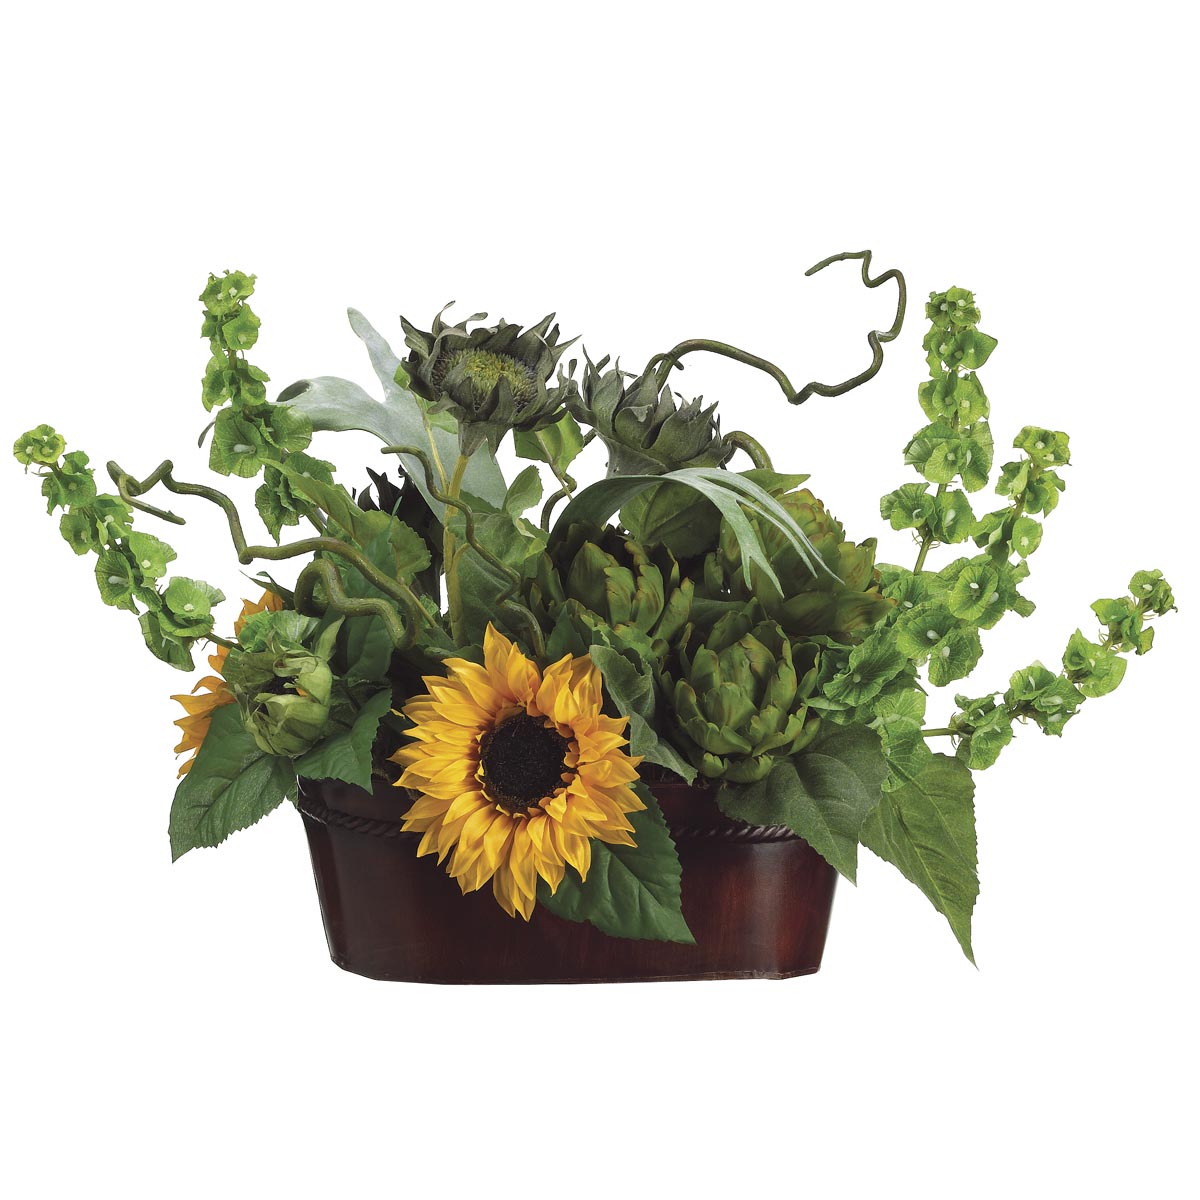 16 Inch Sunflower And Artichoke Arrangement In Metal Container